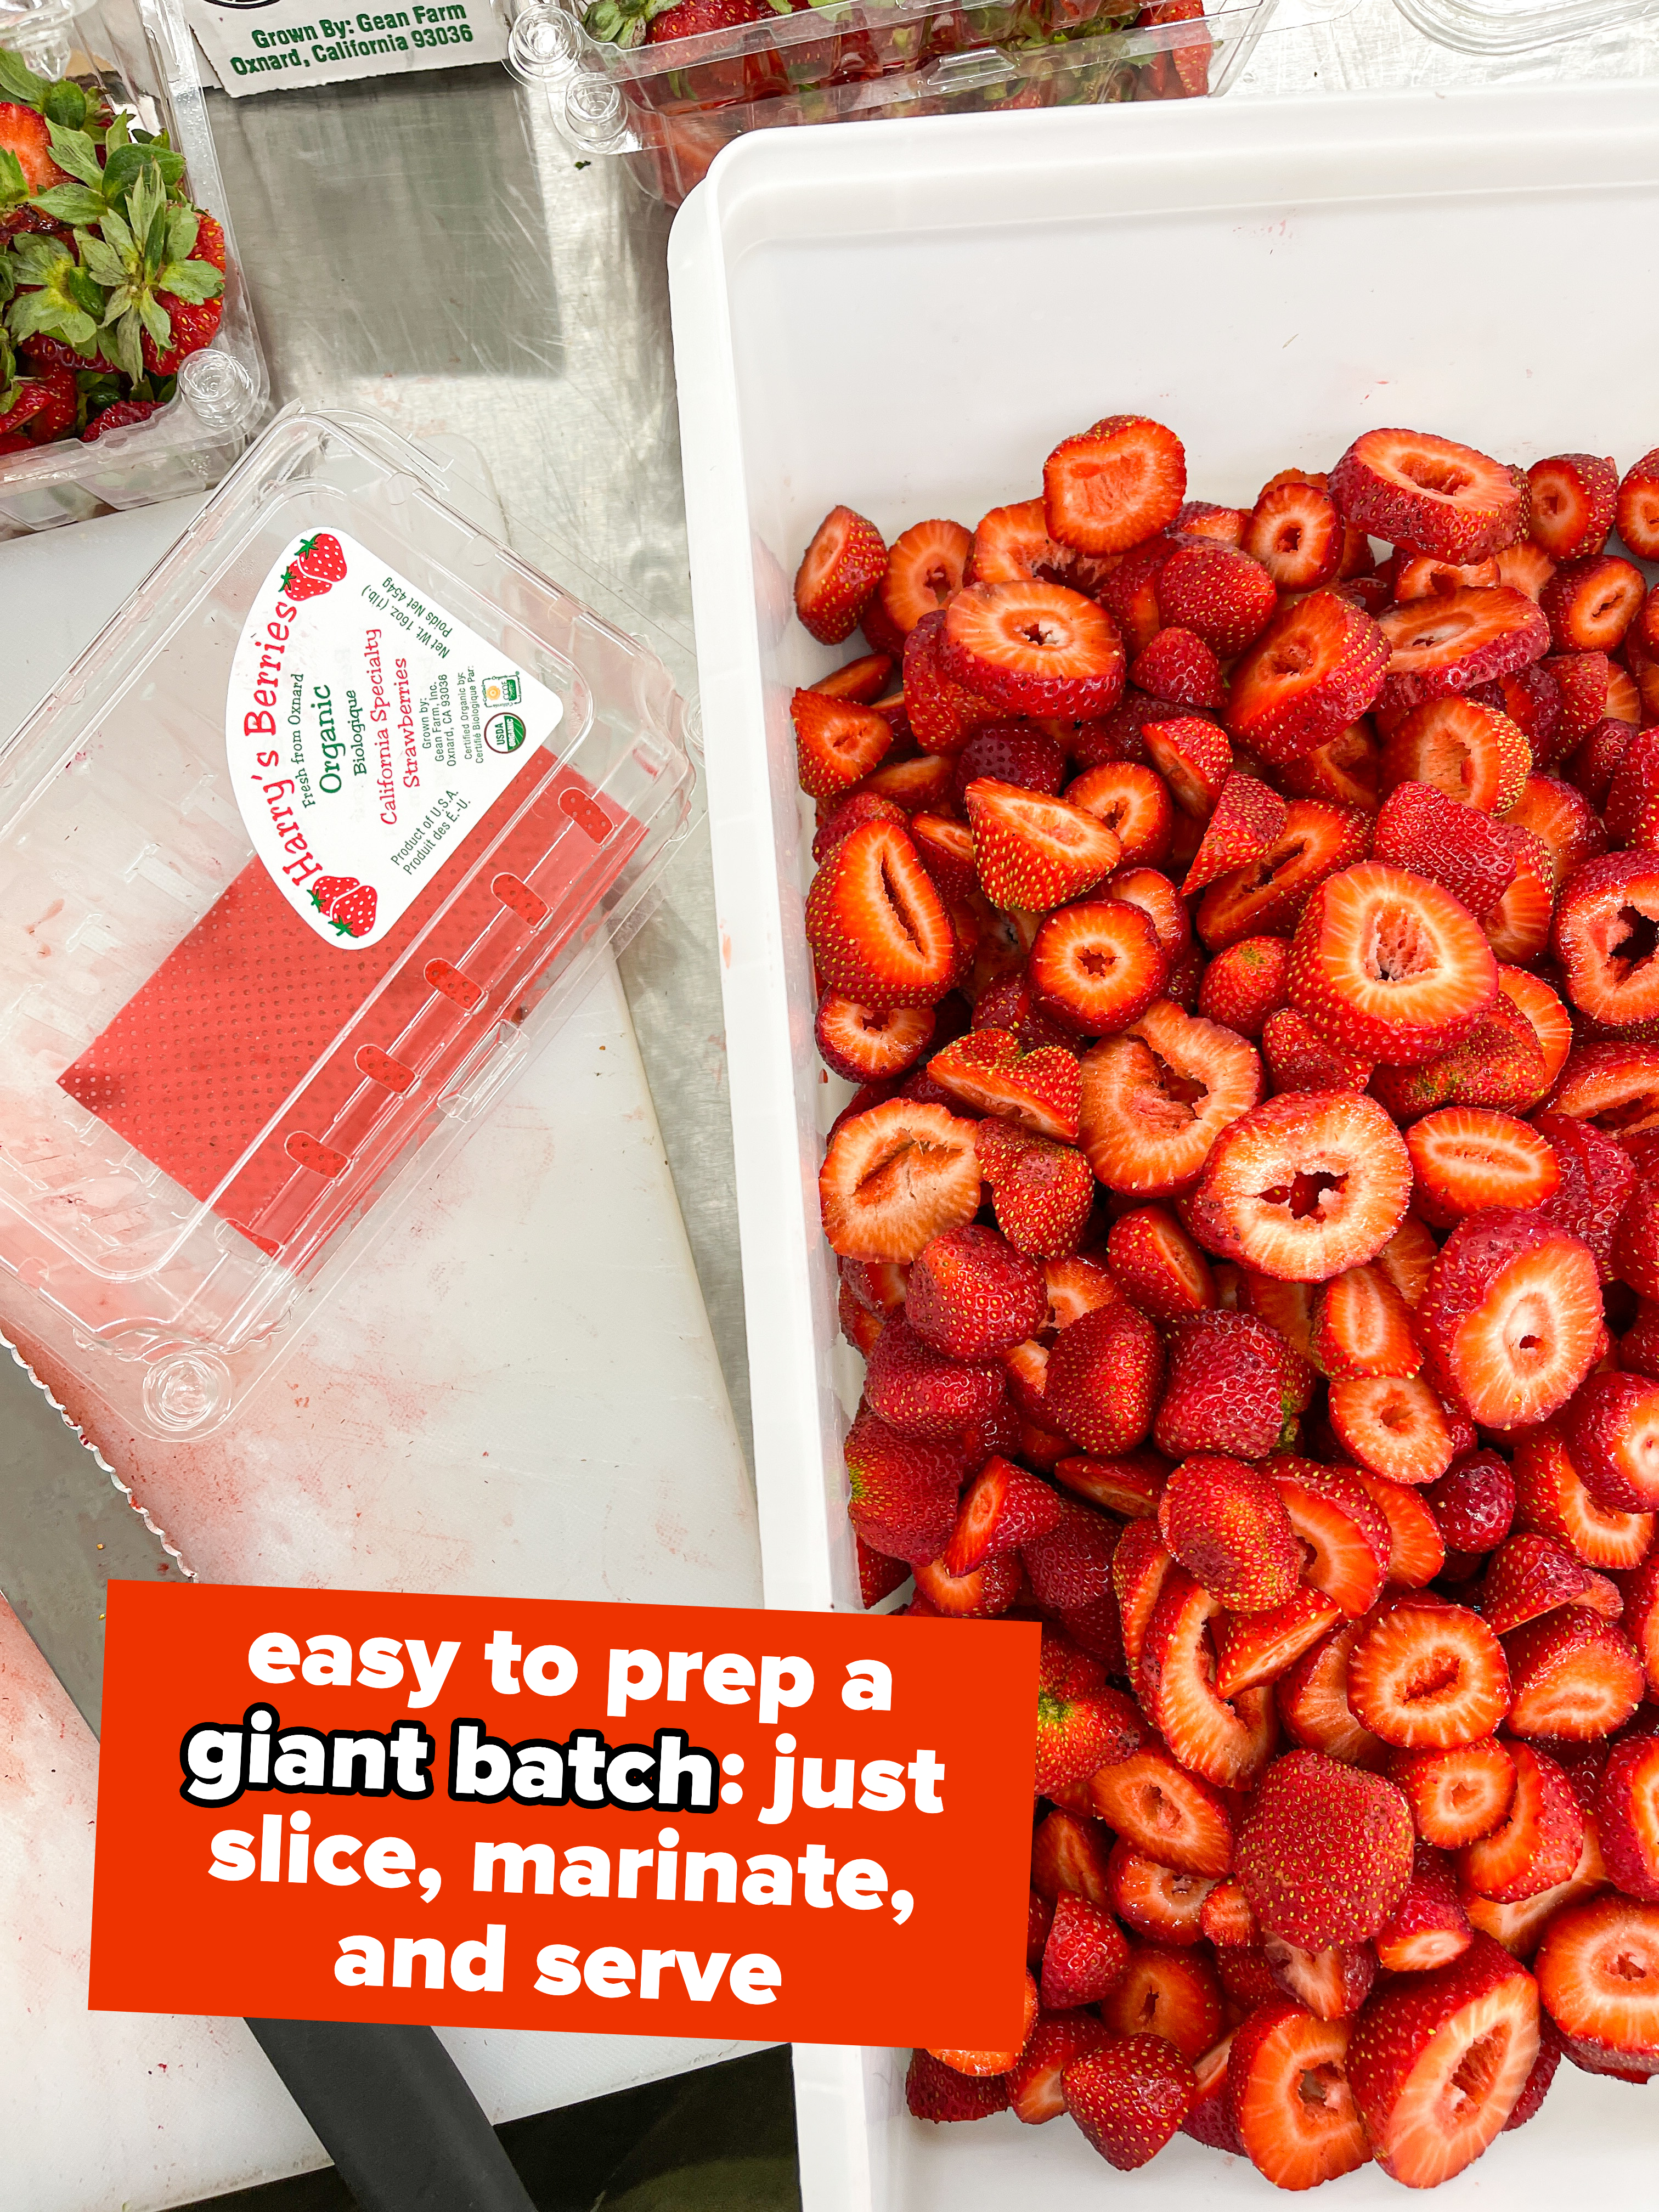 big batch of strawberries that are easy to prep